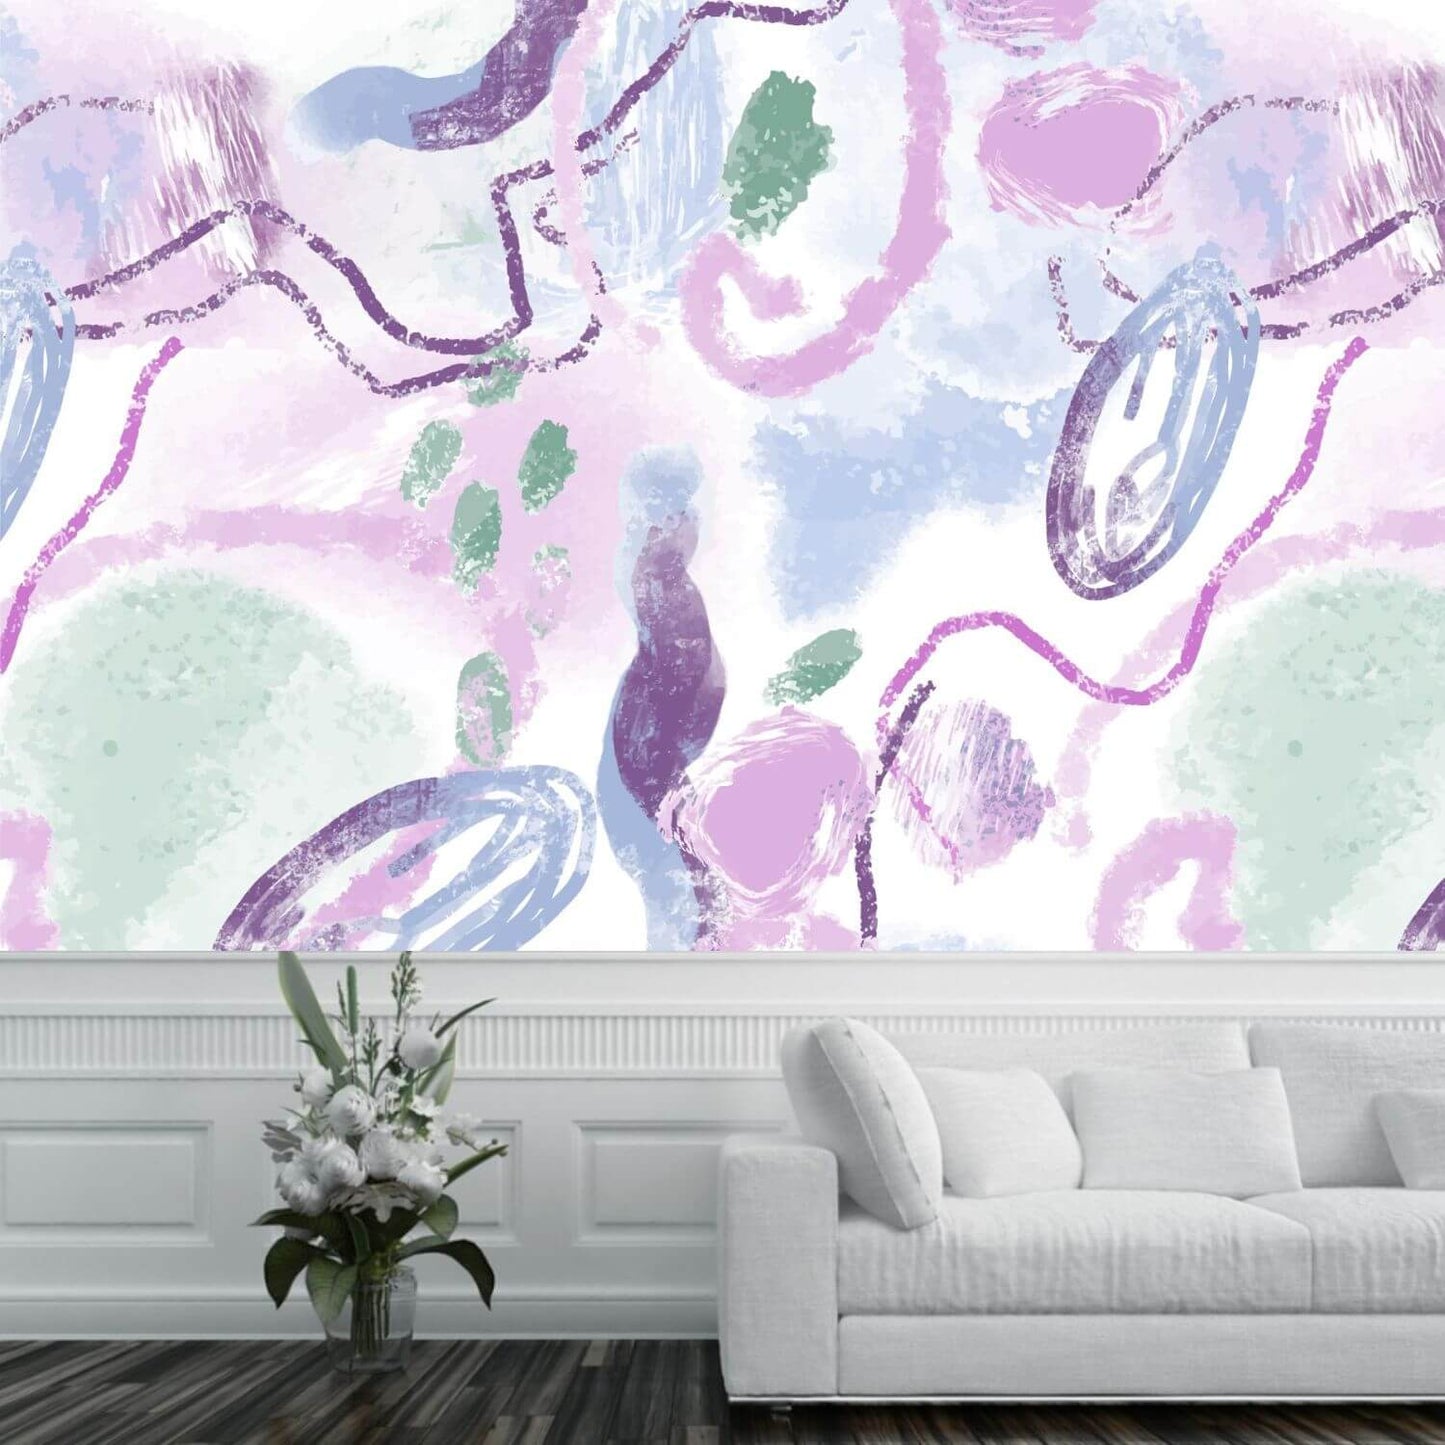 Abstract Lavender Mural Wallpaper (SqM)